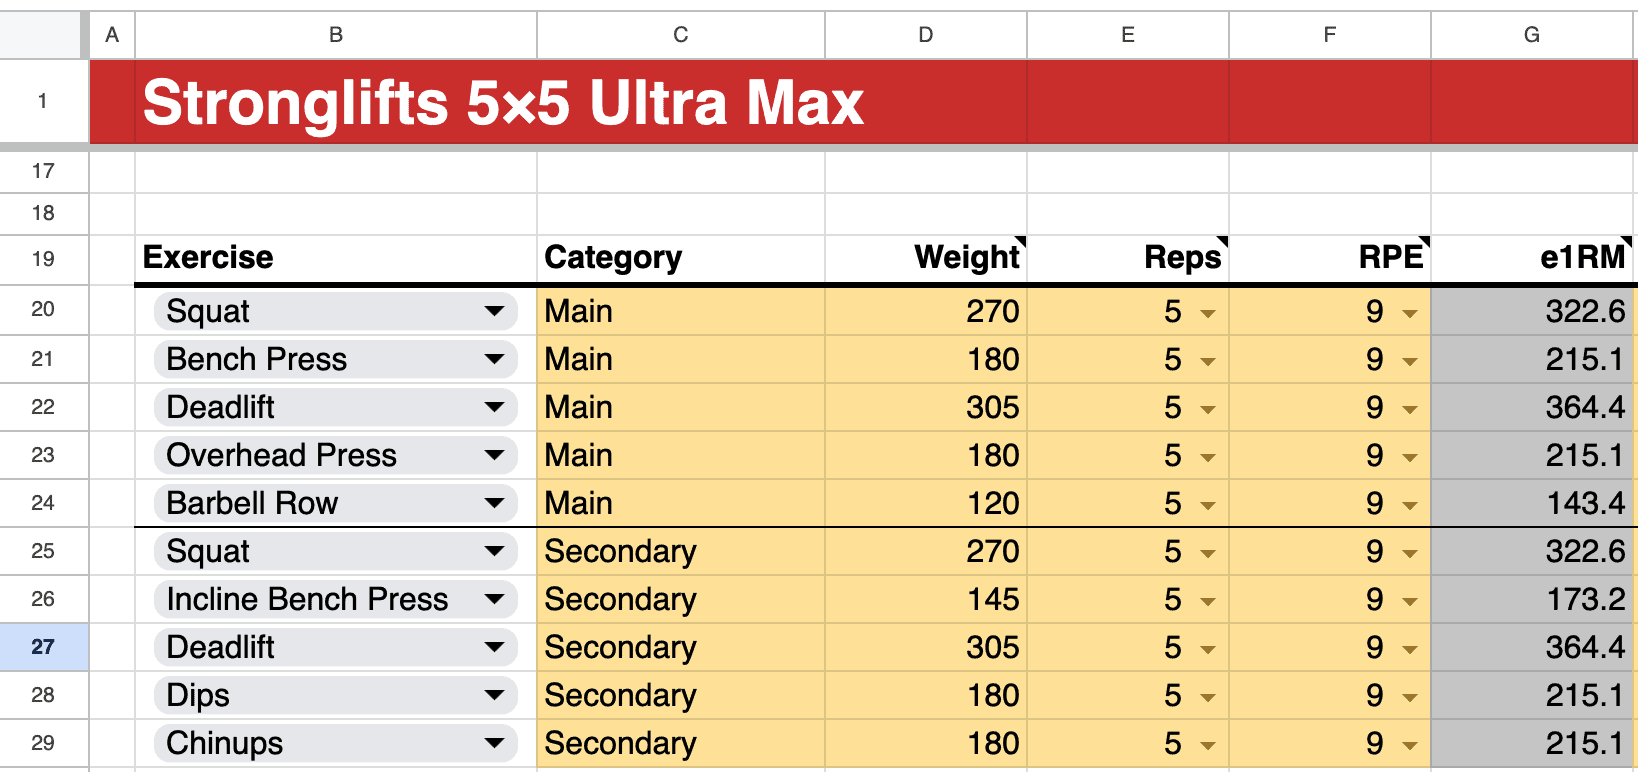 Estimated one rep max calculated